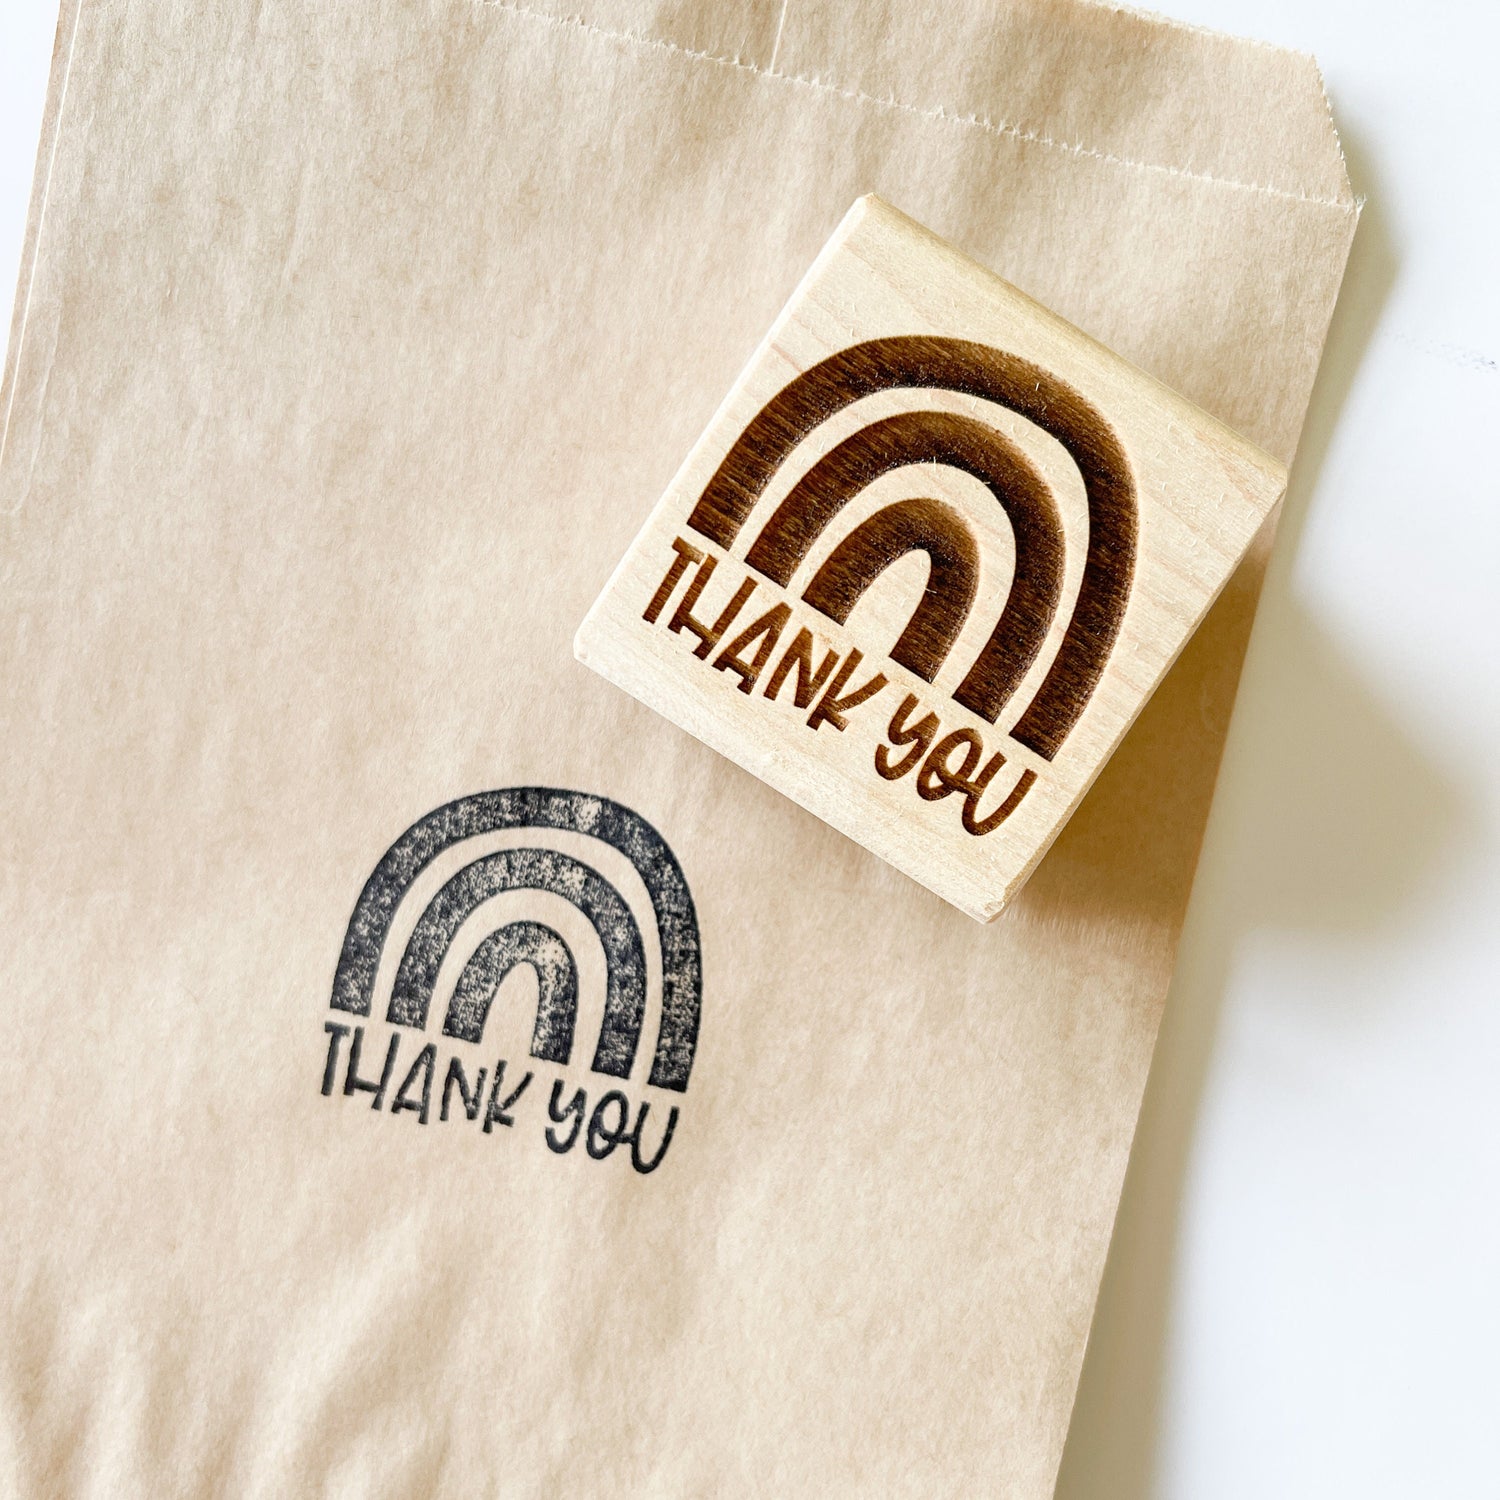 Thank You Stamp. Packaging Logo Stamp. Rainbow Stamp. Small Business T –  Print Smitten Paper Co